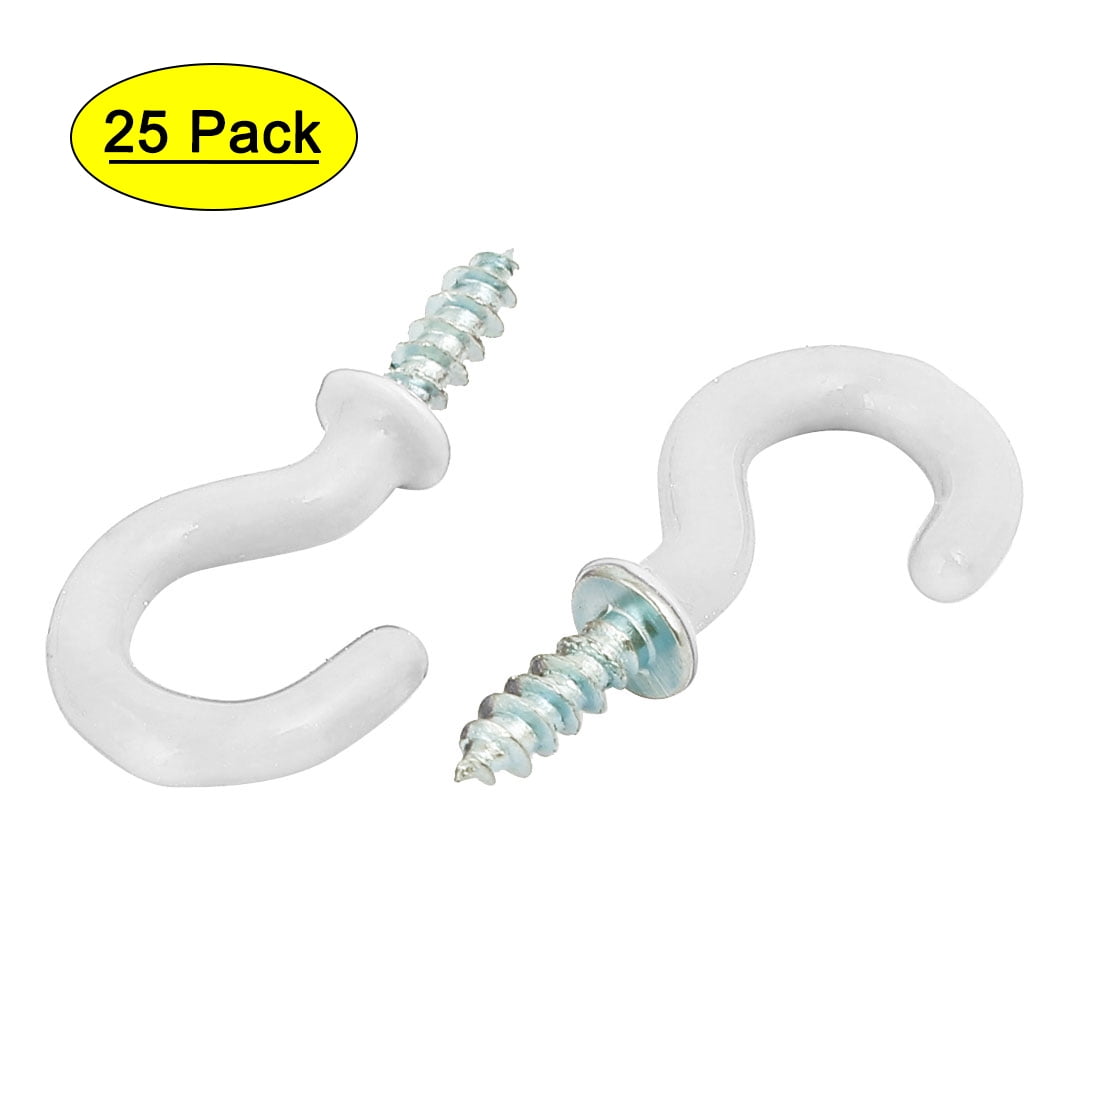 7/8 Inch Plastic Coated Screw-in Open Cup Ceiling Hooks Hangers Brown 15pcs